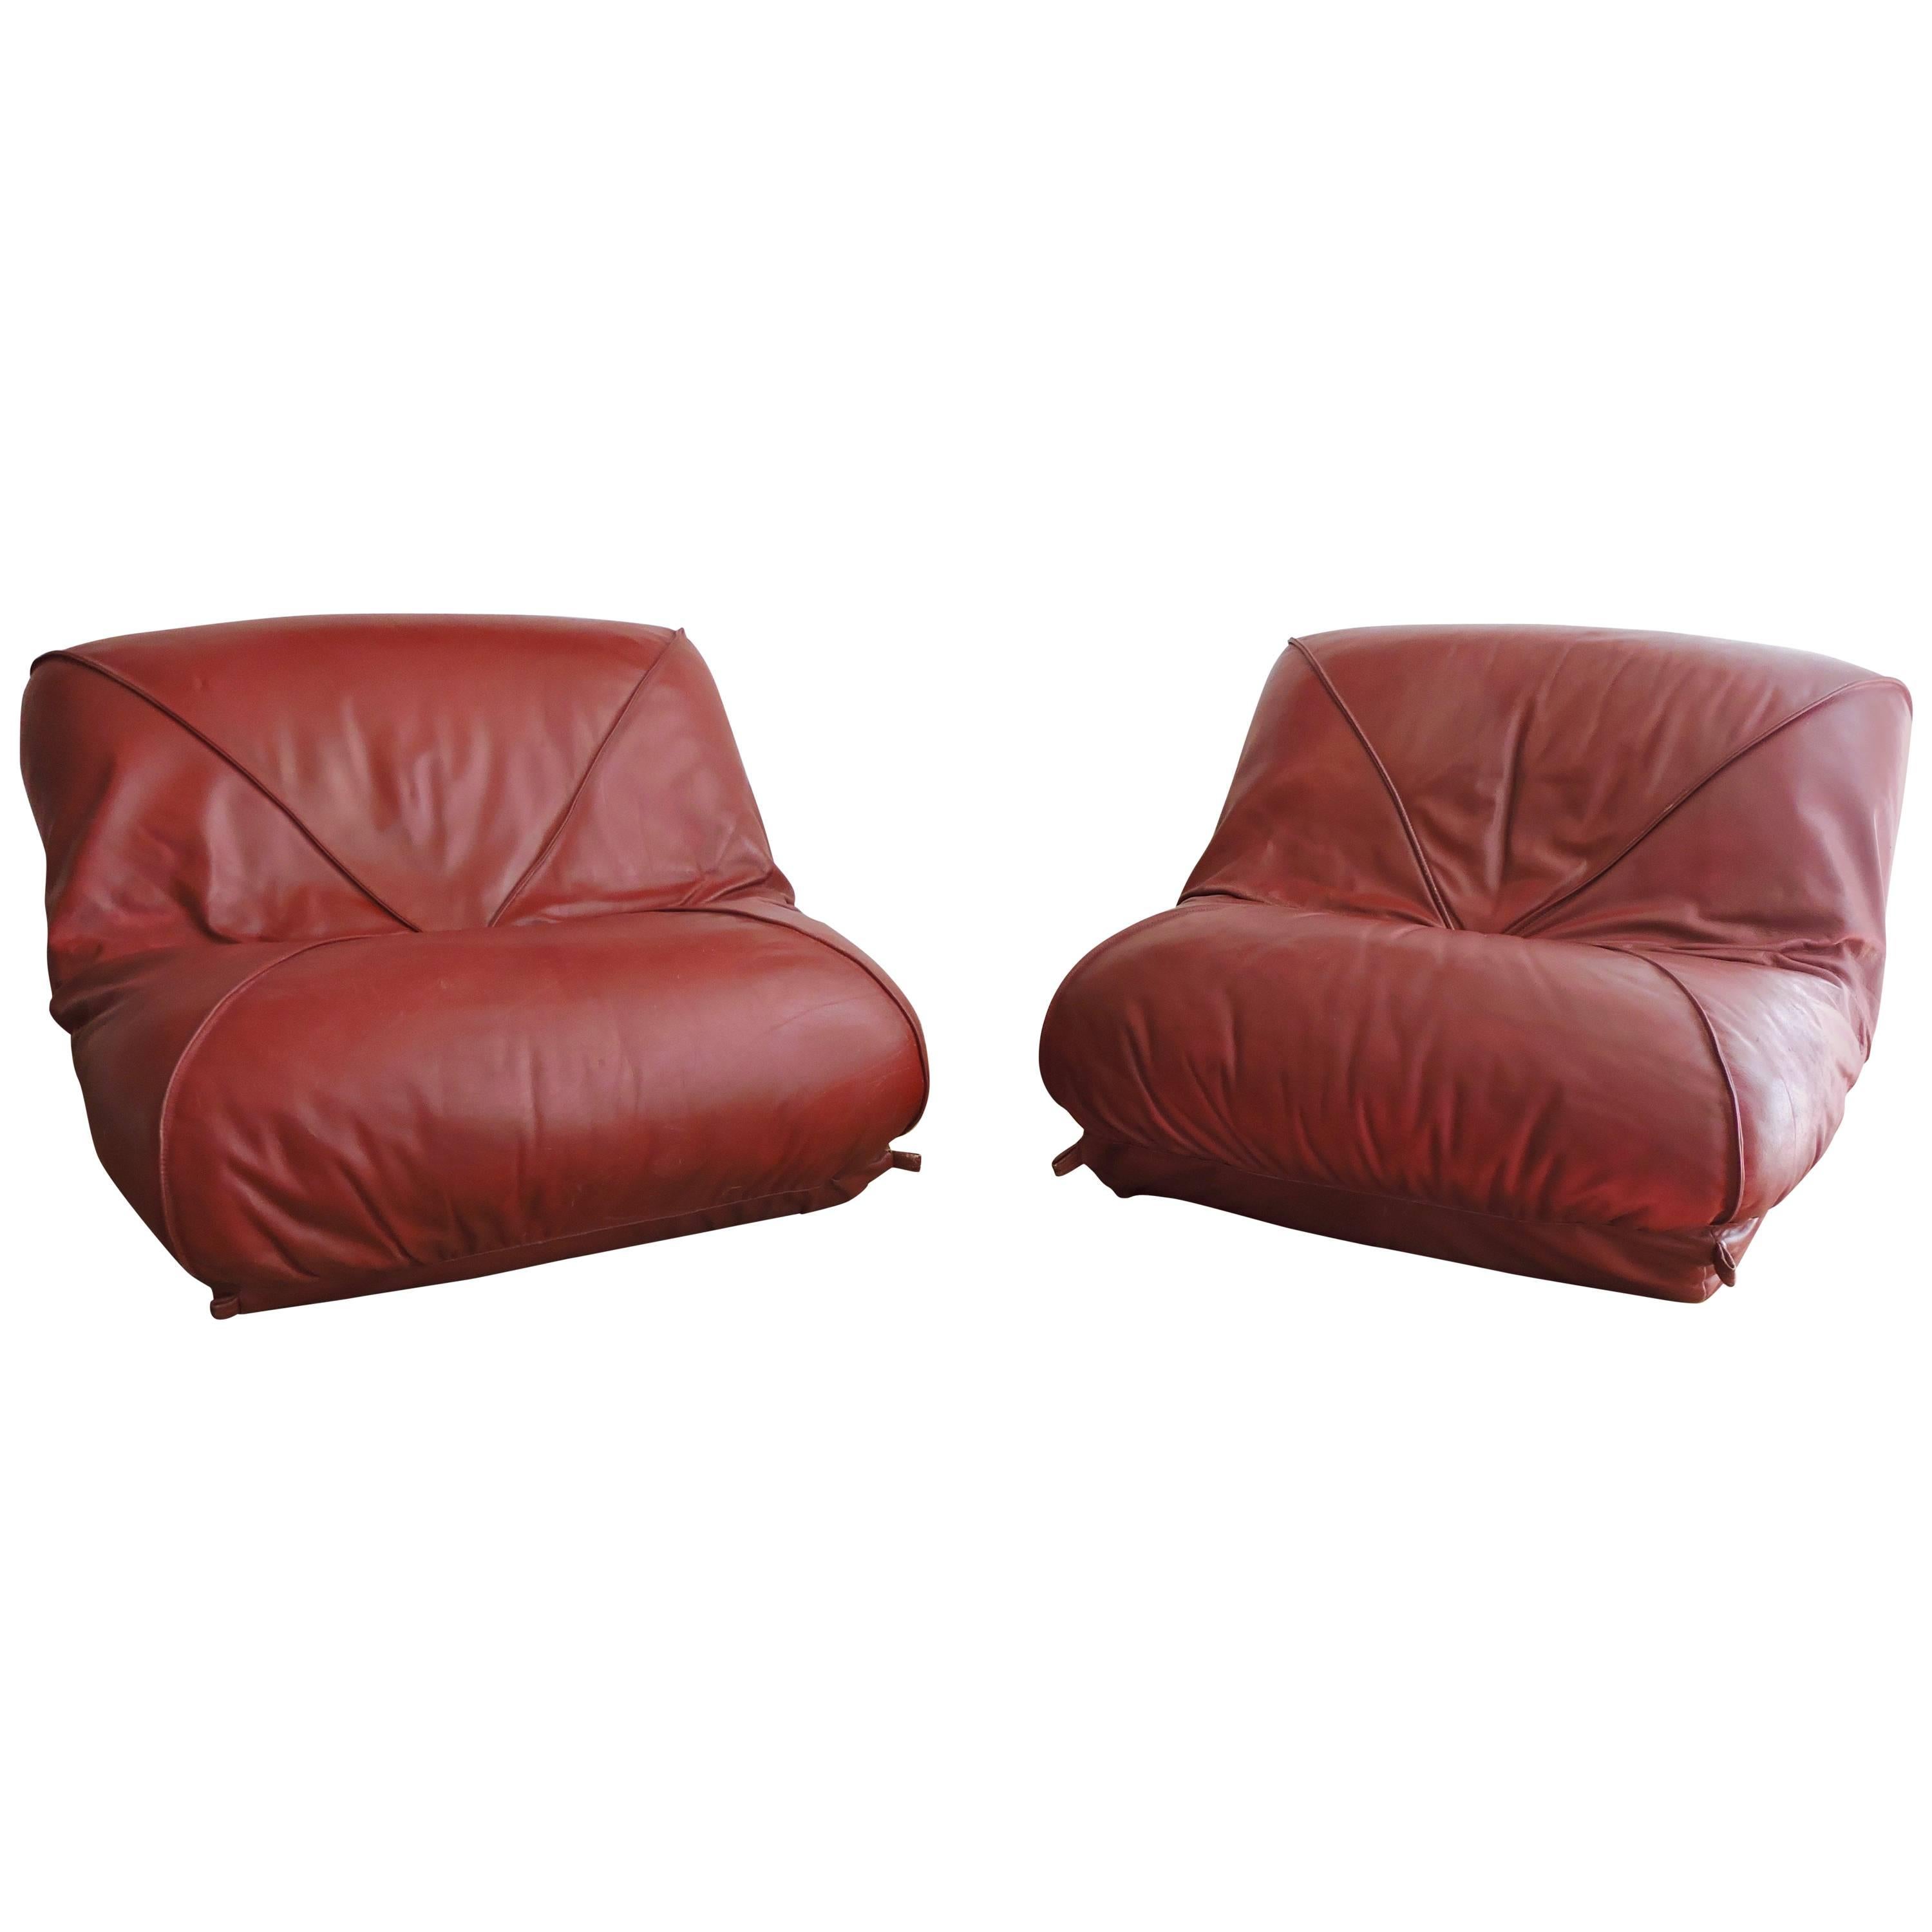 Pair of 1970s Red Leather Low Soft Chairs by Airborne